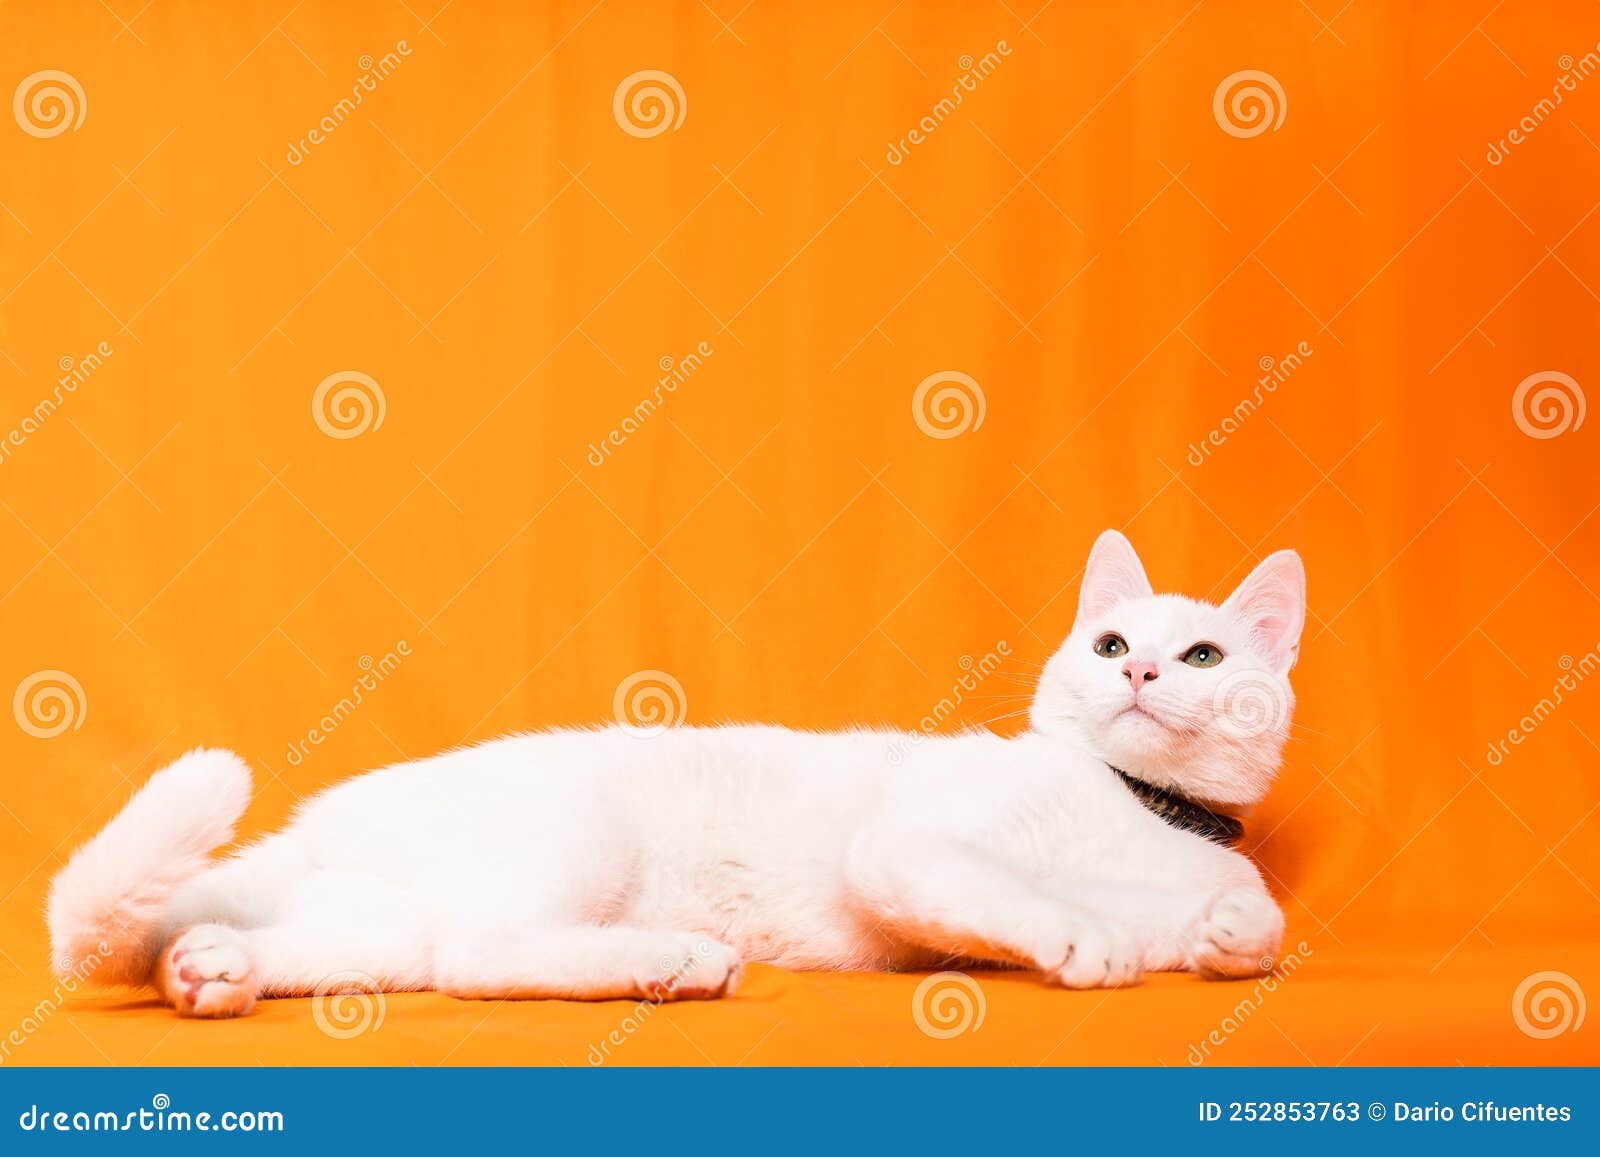 lazy white cat puppy lying down looking up on orange background